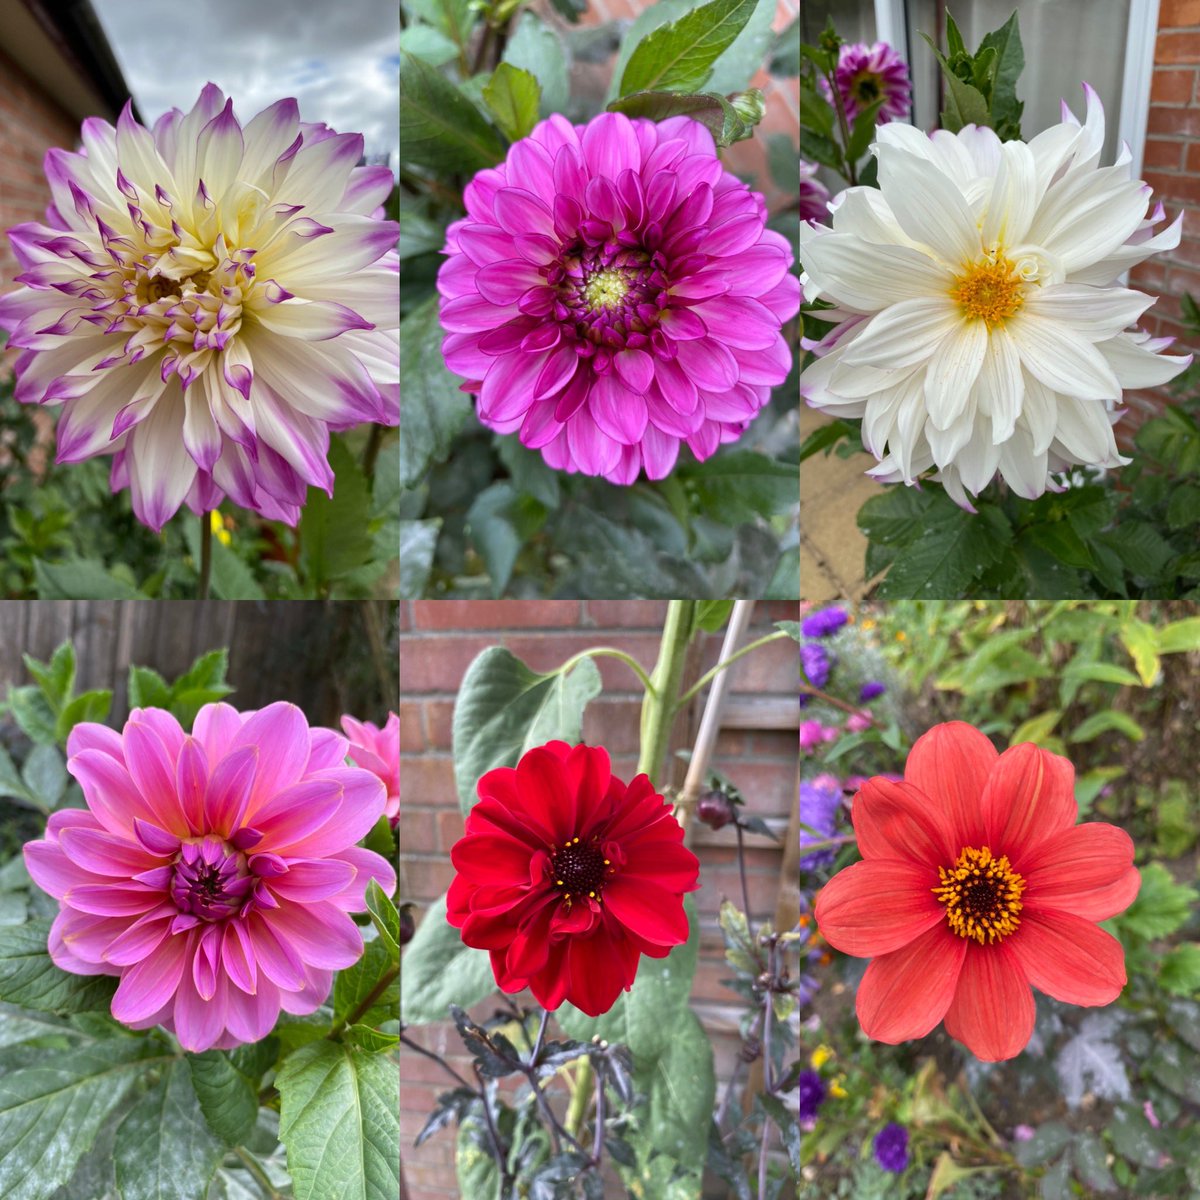 #dahlias for this weeks #sixonsaturday now the days are drawing in the dahlia’s seem to be at their best #gardening #flowers